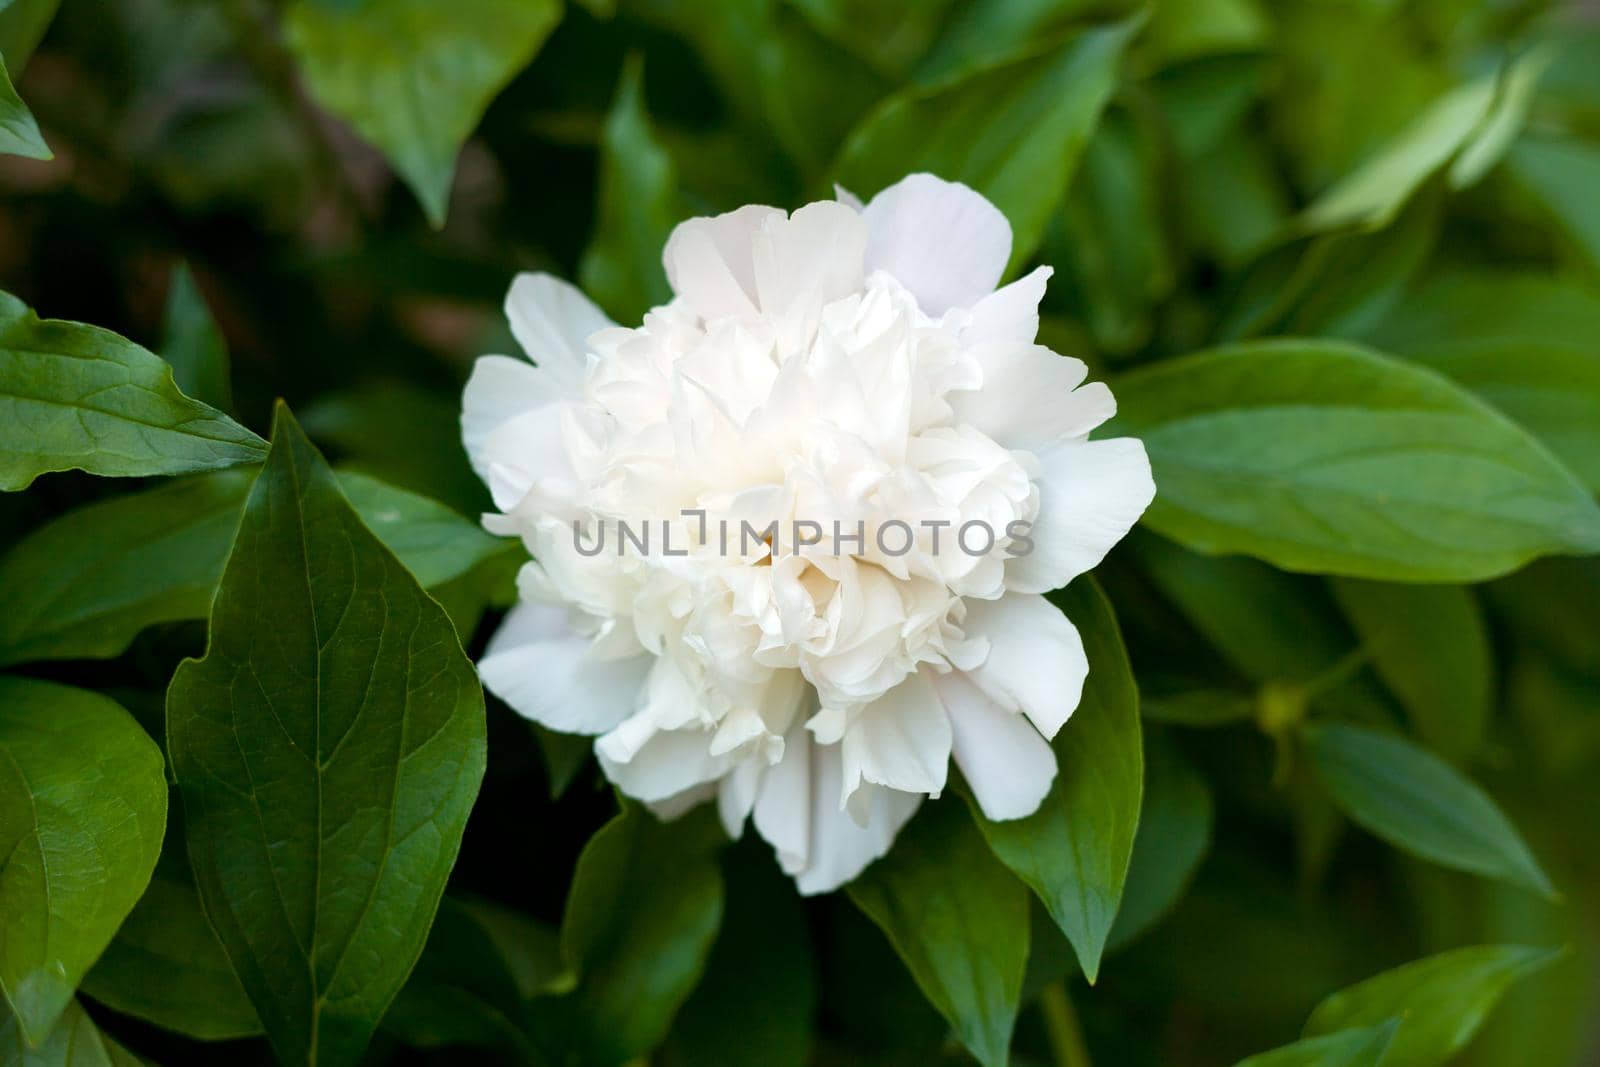 green leafs and white peonies pattern. white peony flower. Flower light texture. Floral background.